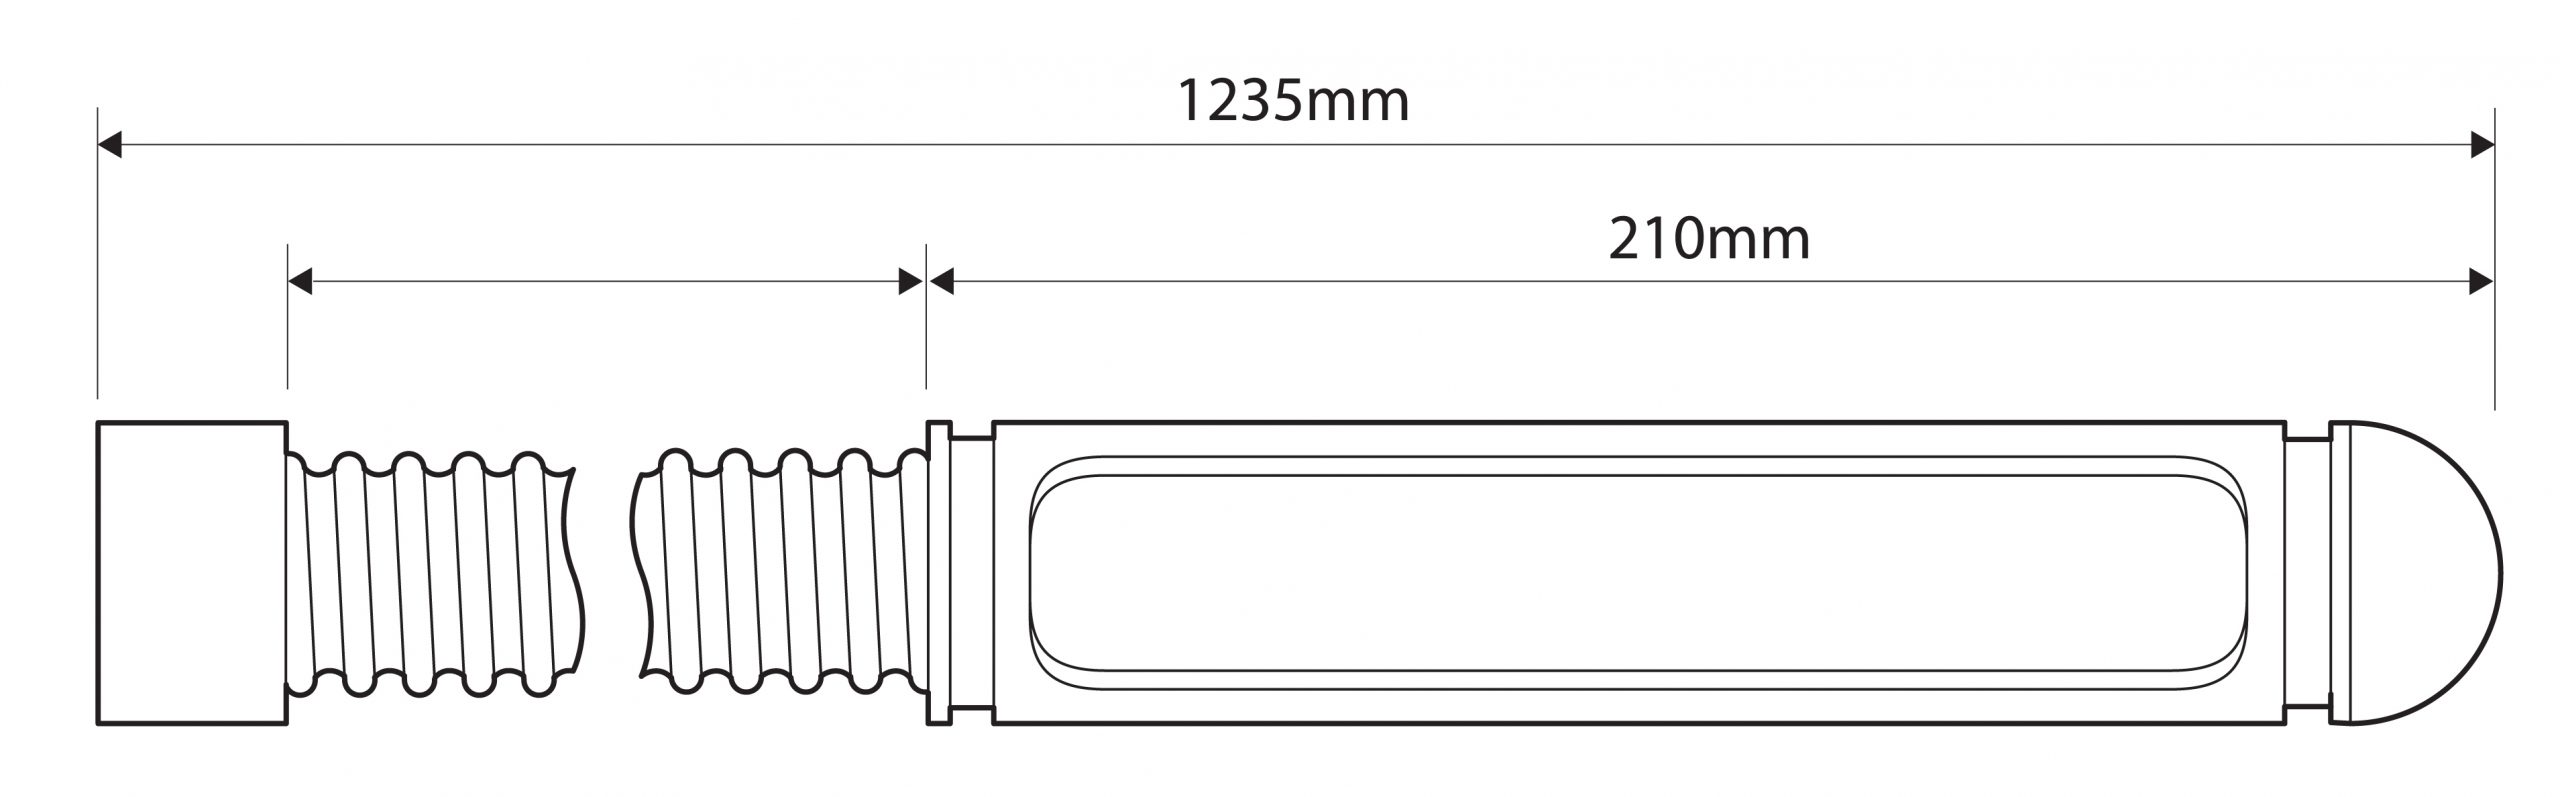 LSP-213 Siren Pipe Extension and Speaker Kit Dimensions Illustration Showing 1235mm/210mm Extension Length